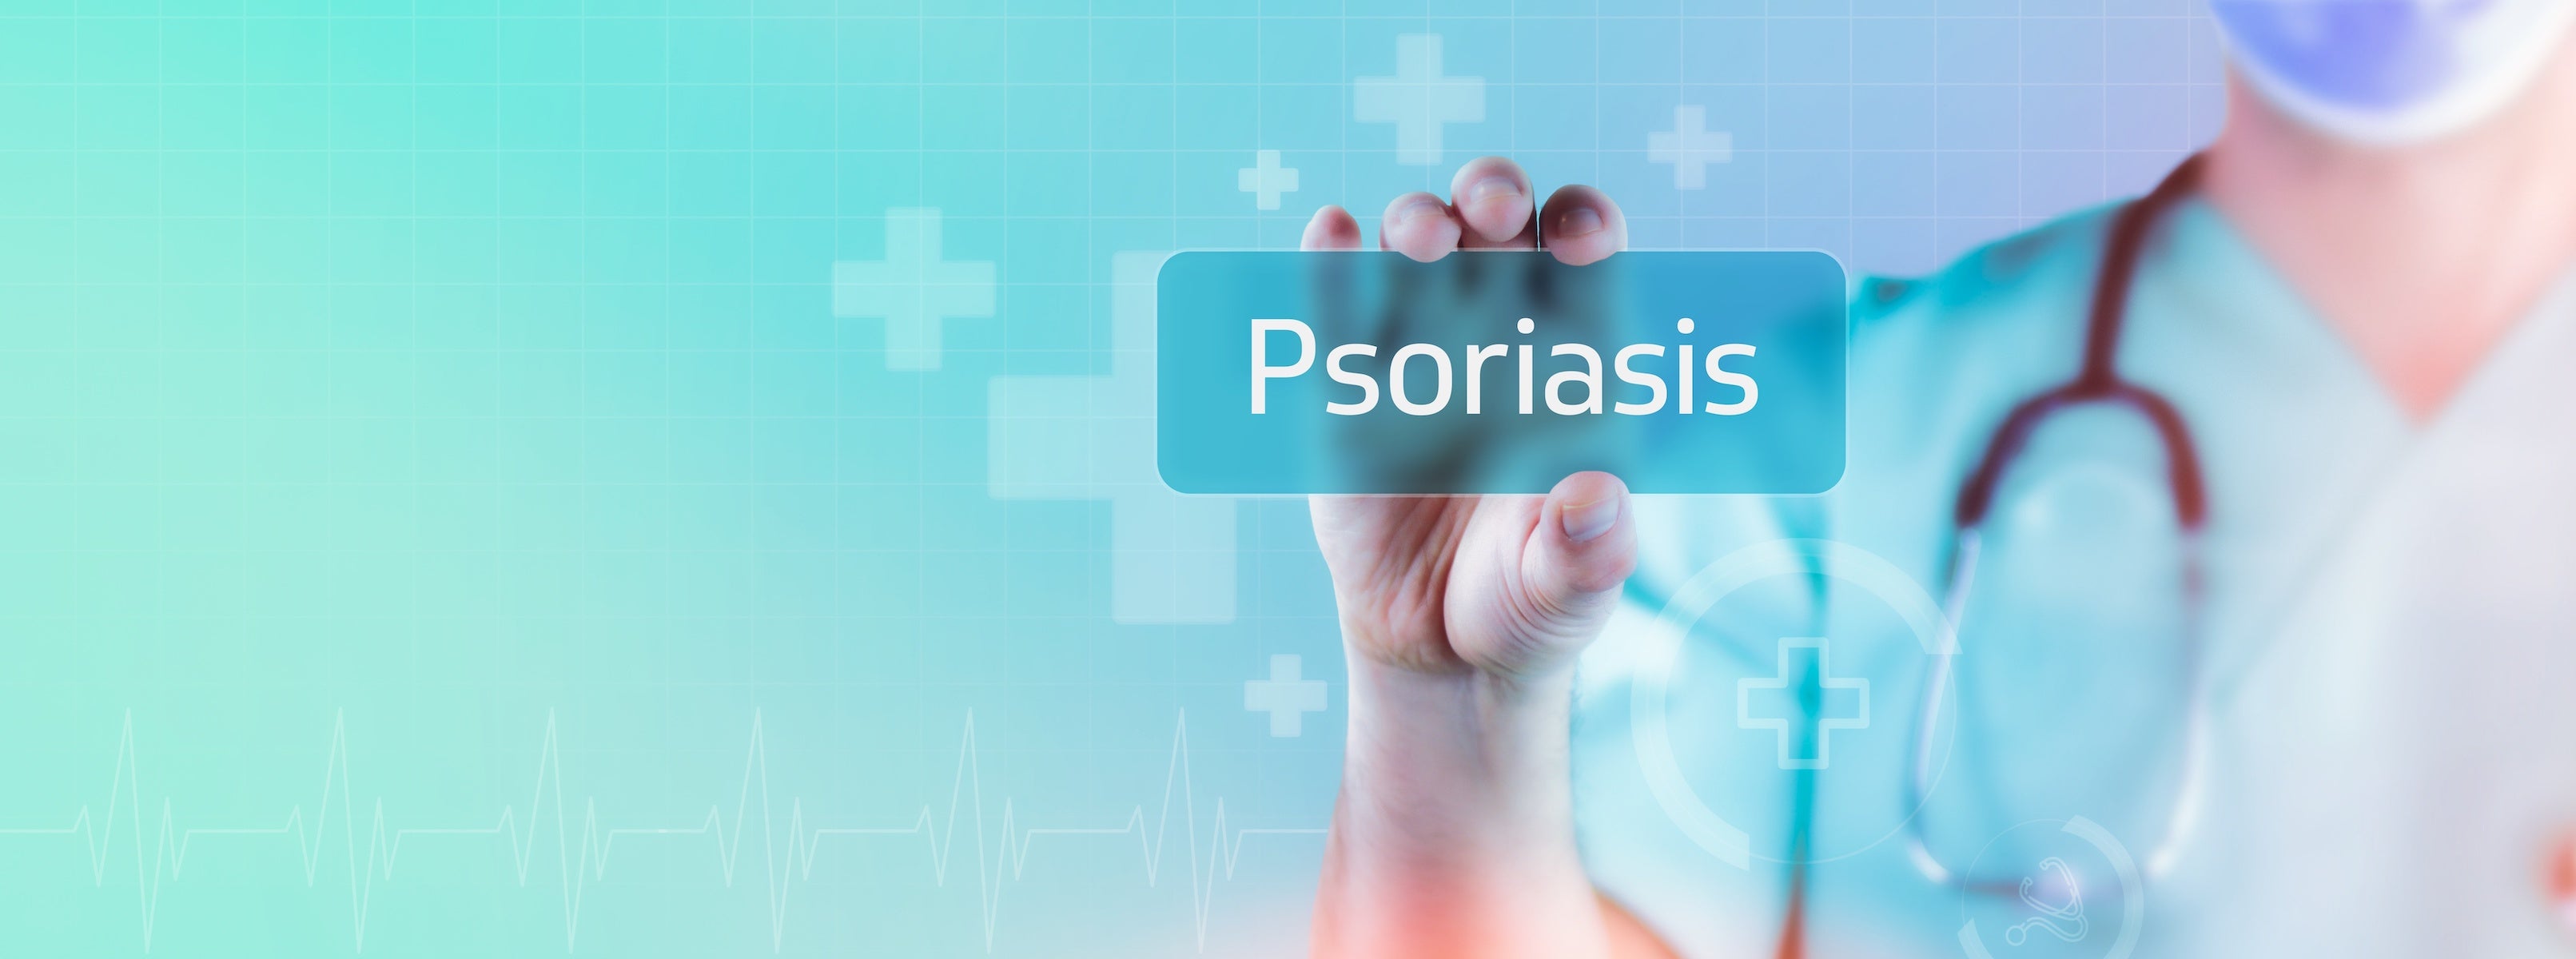 Facial Psoriasis: what you need to know